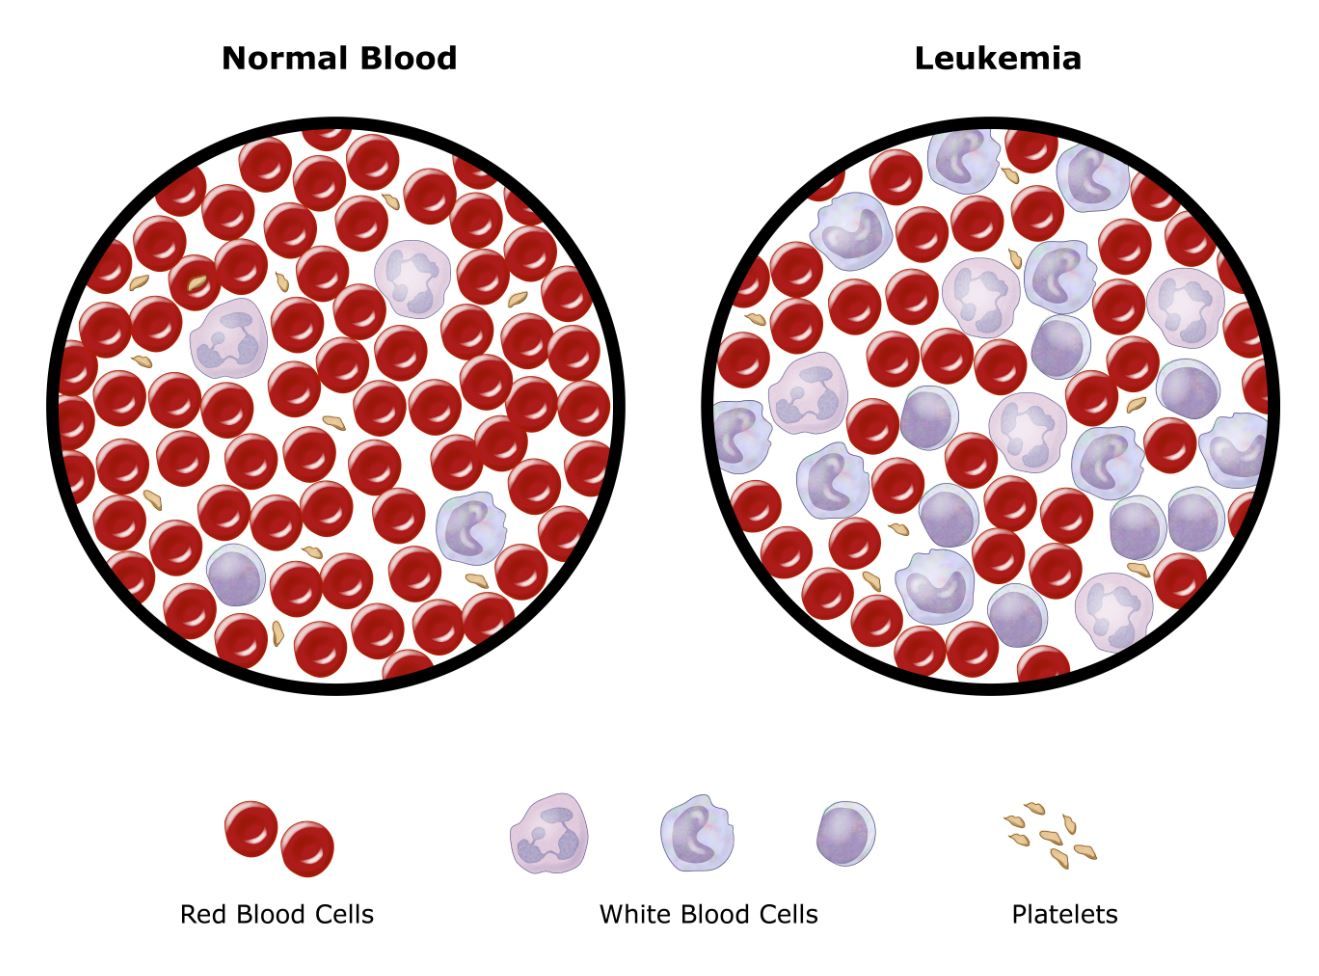 Illustration of normal blood cells and leukemia cells